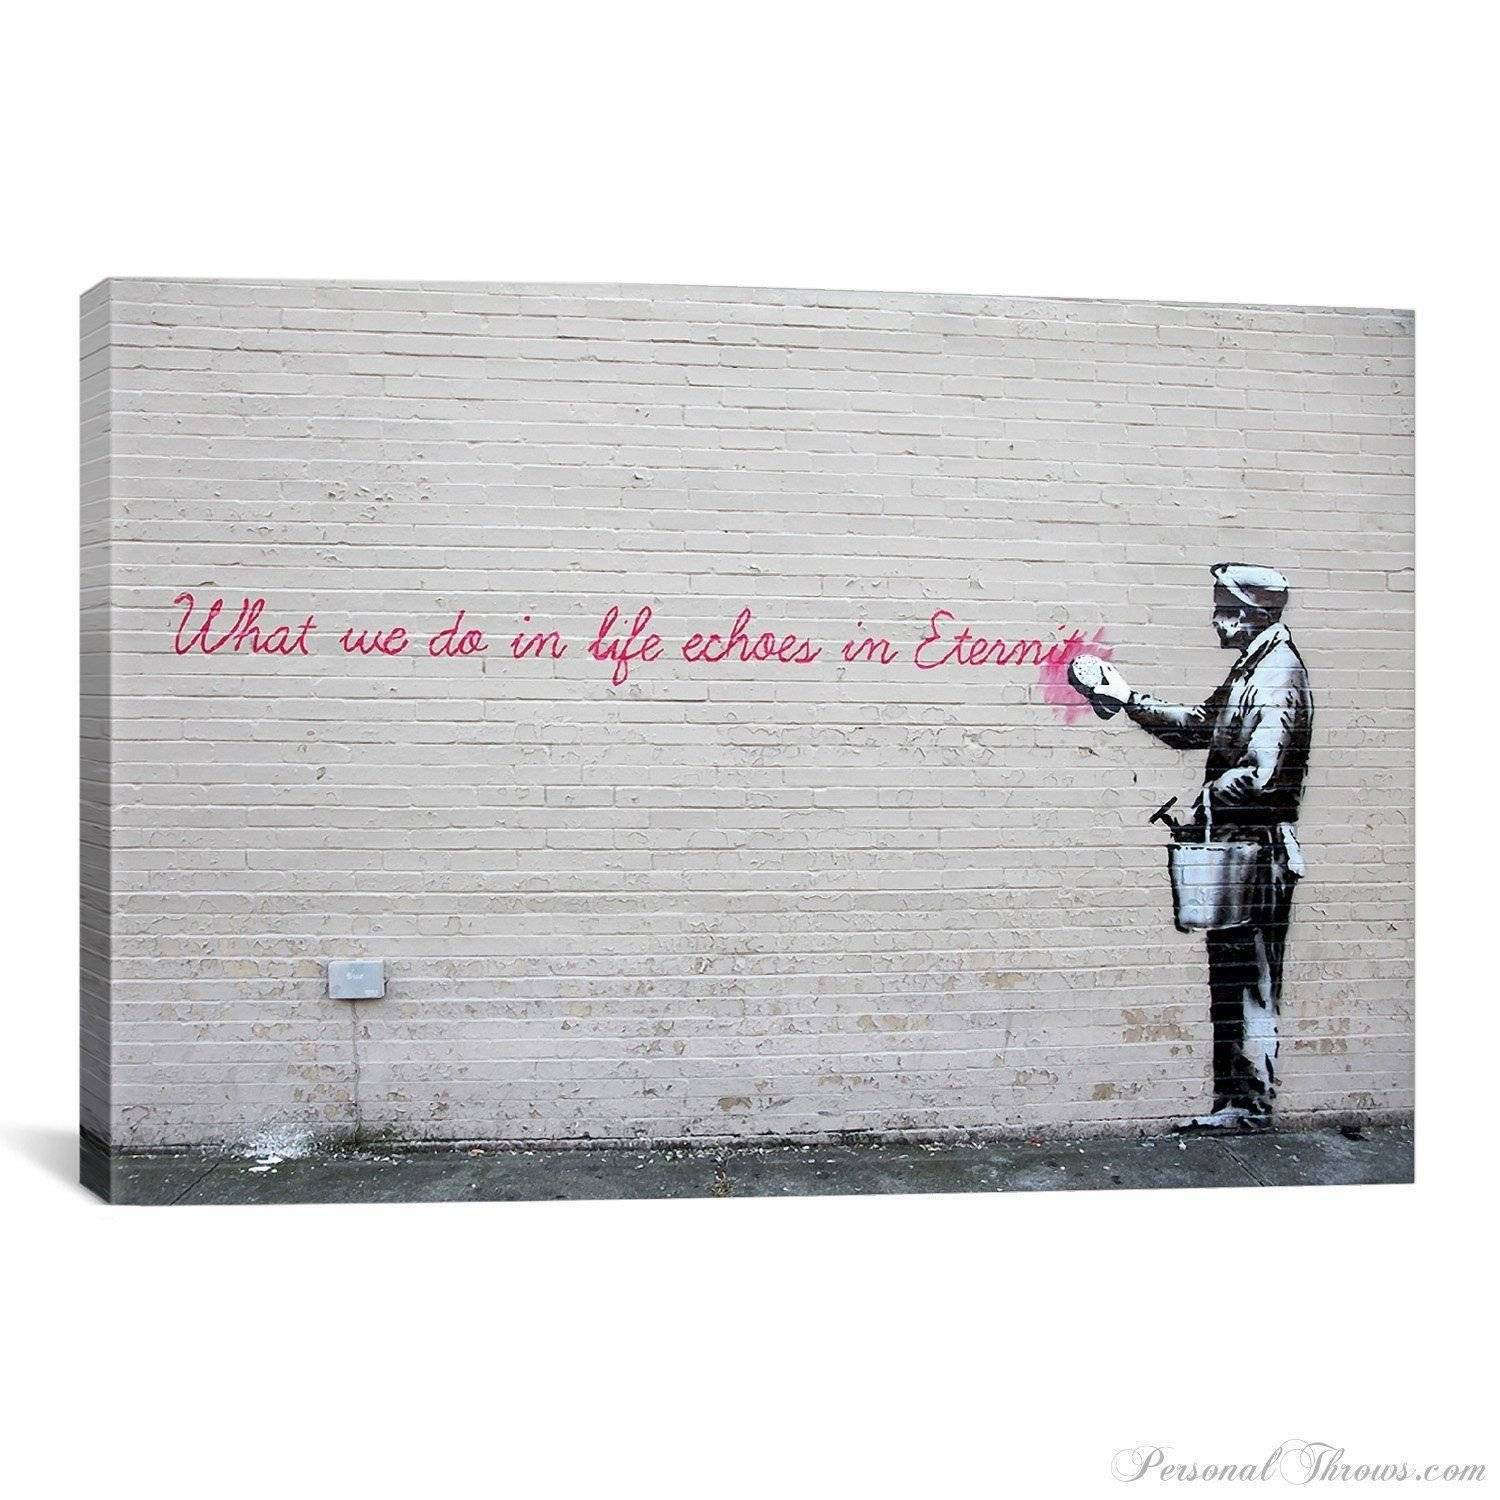 Designer Gifts - Banksy, "What We Do In Life Echoes In Eternity" Canvas Gallery Wrap Print